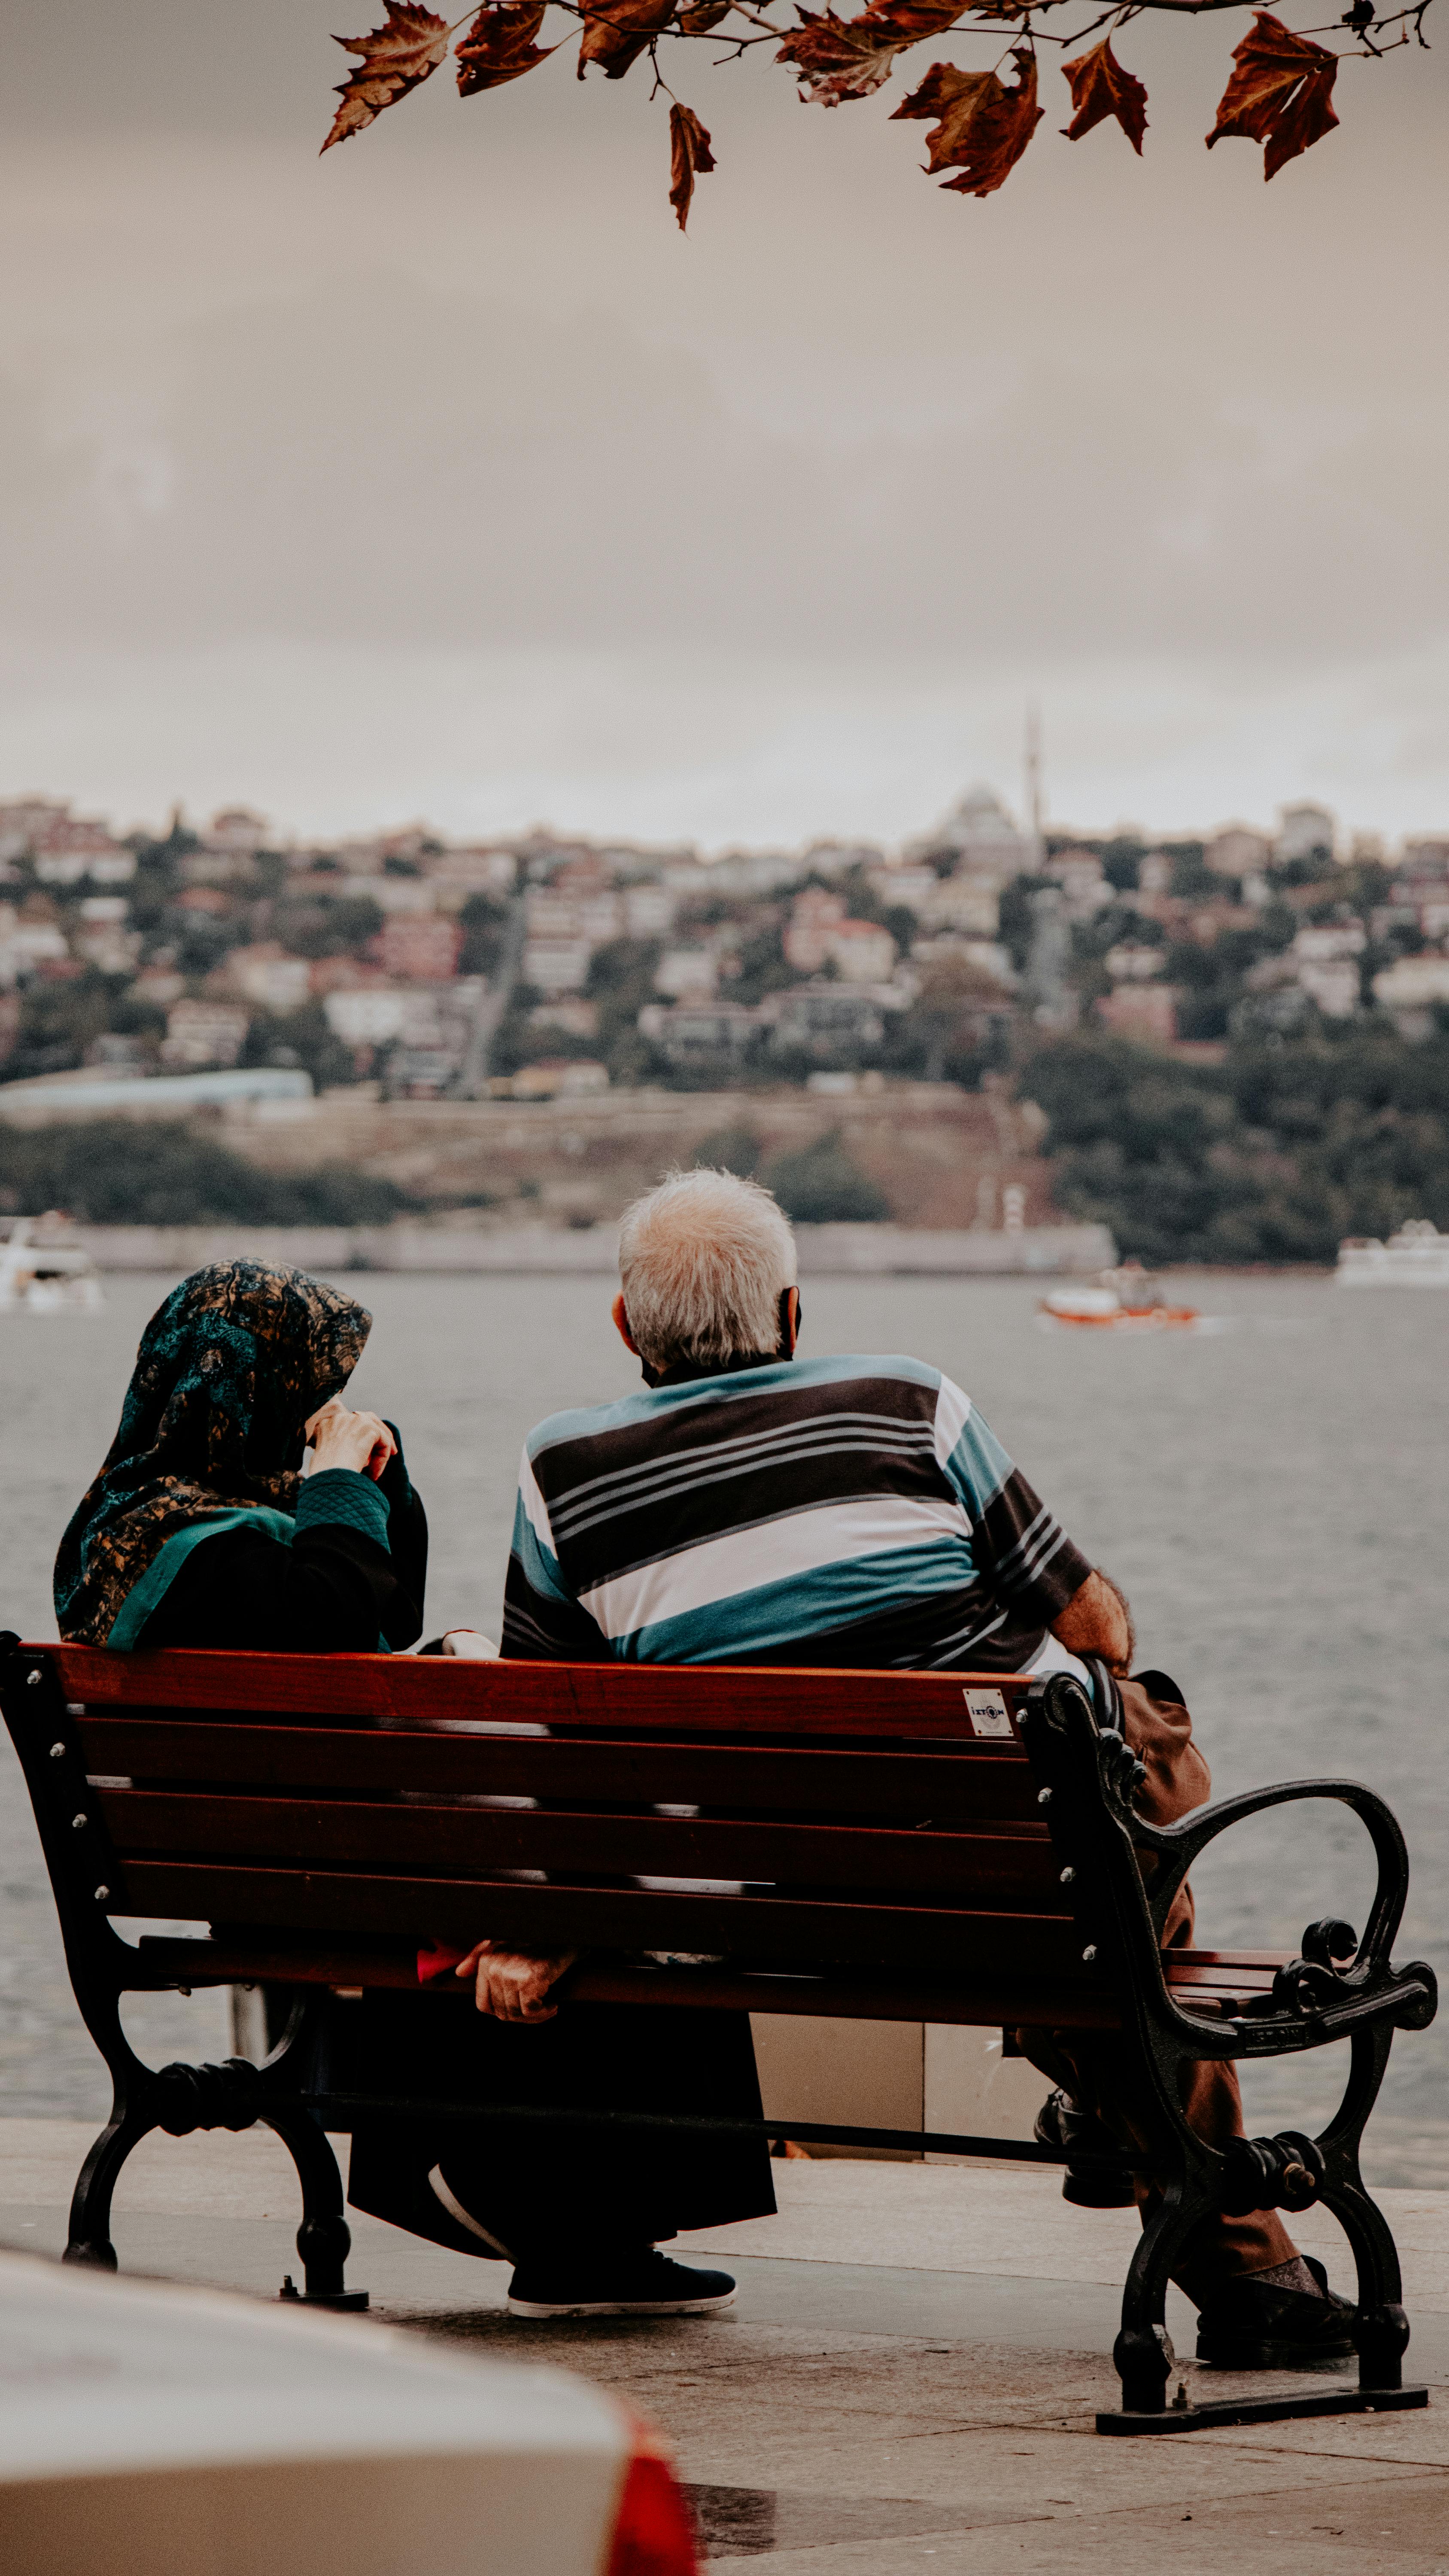 A middle-aged couple sitting on a bench overlooking water | Source: Pexels